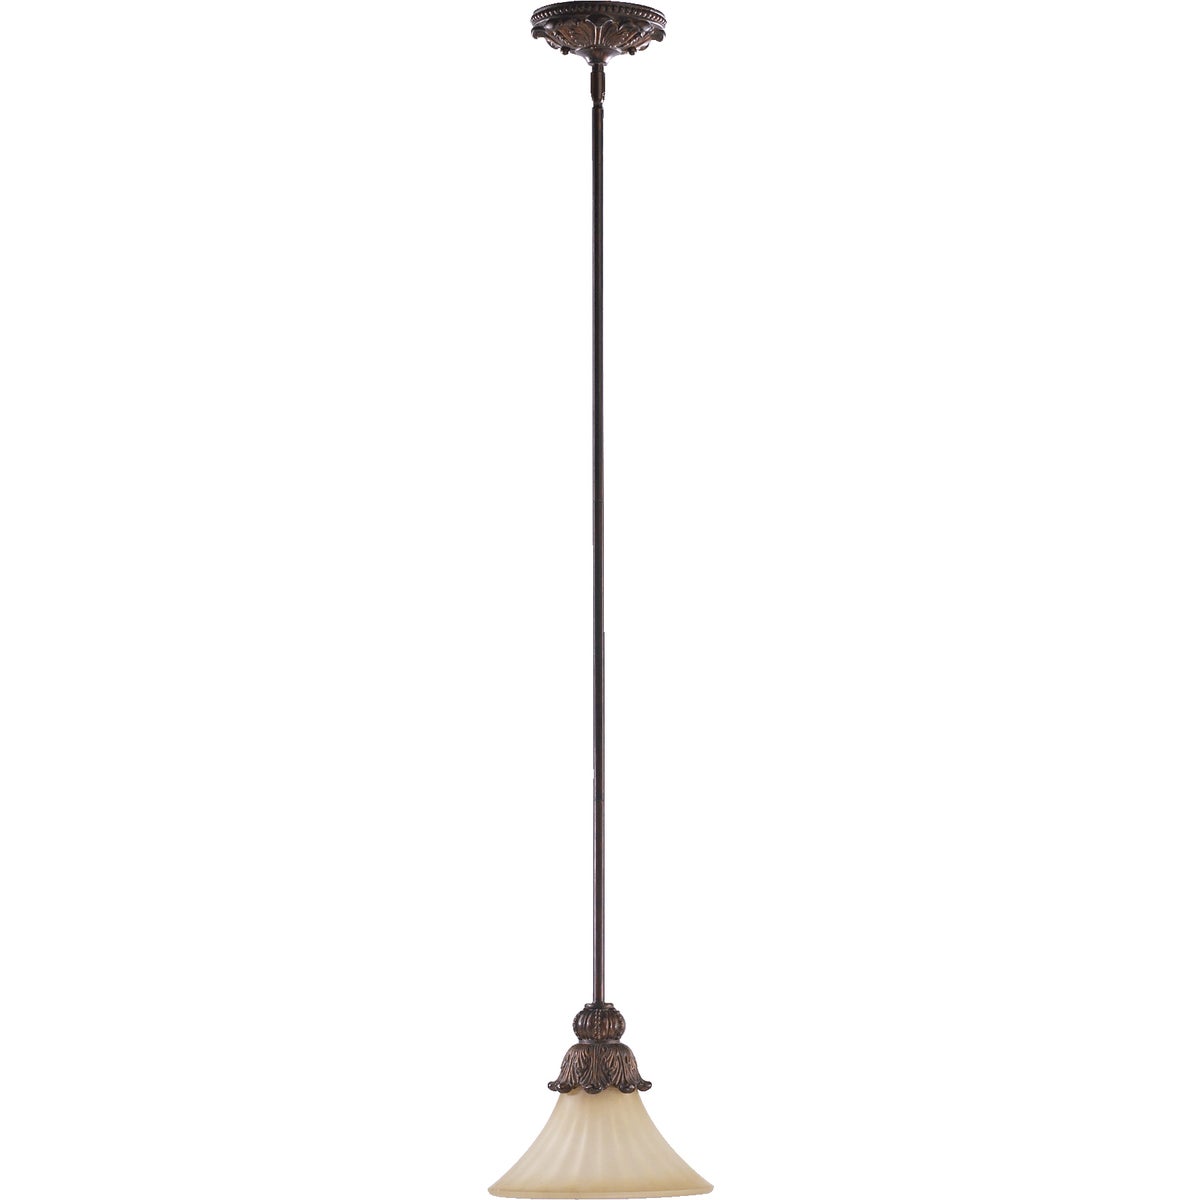 Traditional pendant light with corsican gold finish, featuring a cast structure and ornate wood and bronze detailing. 9"W x 10.75"H.